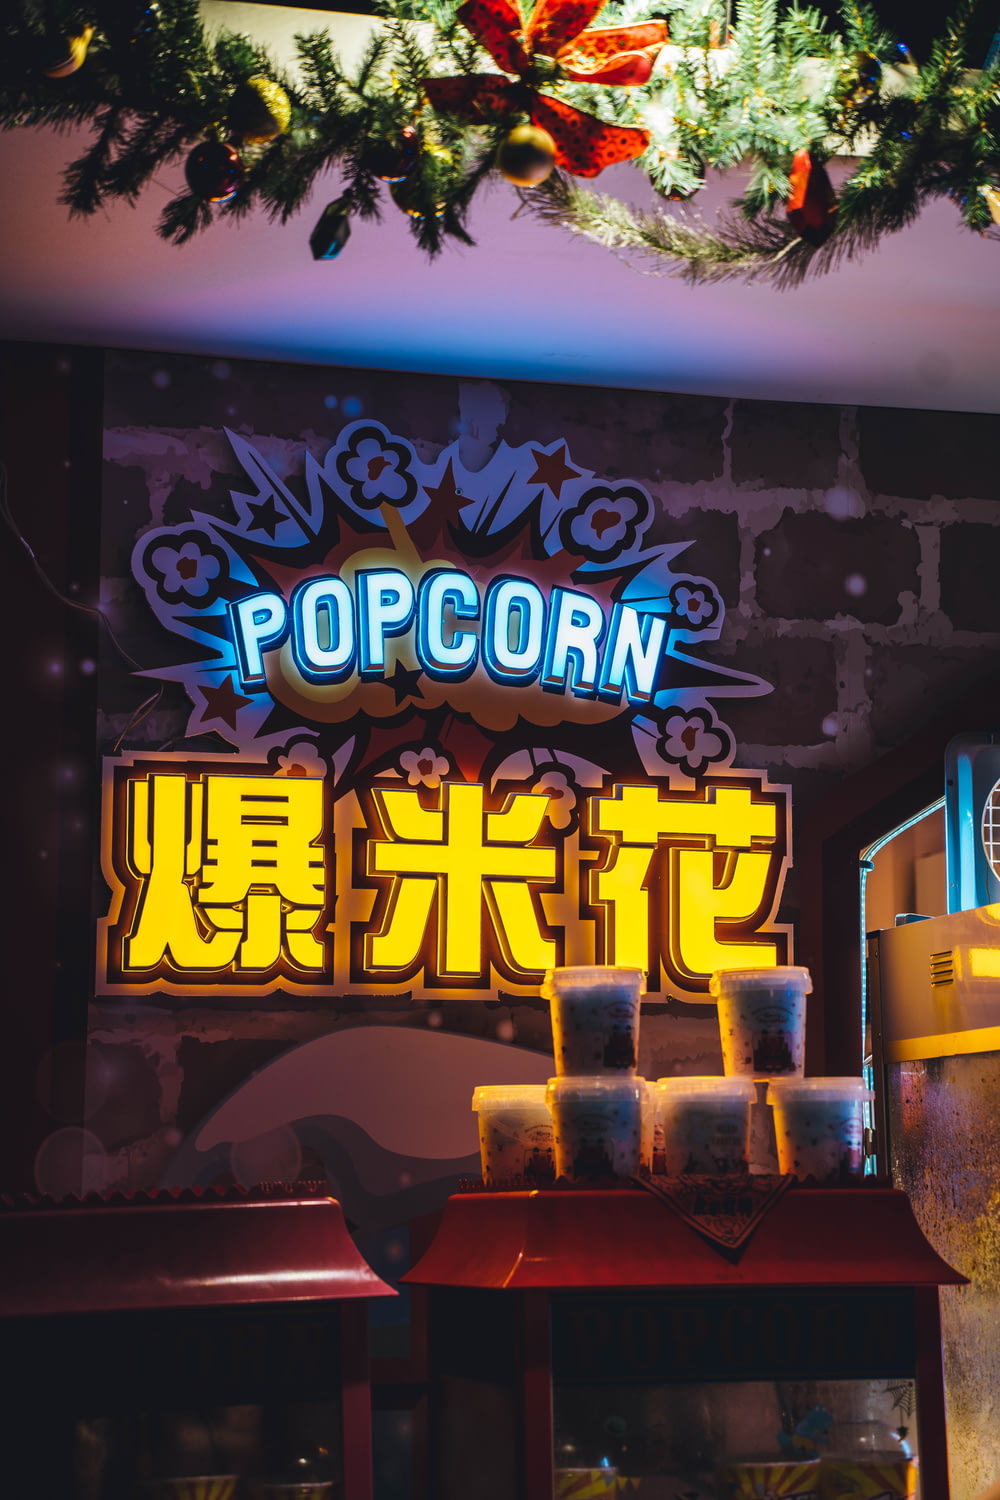 a neon sign that reads popcorn in a chinese language